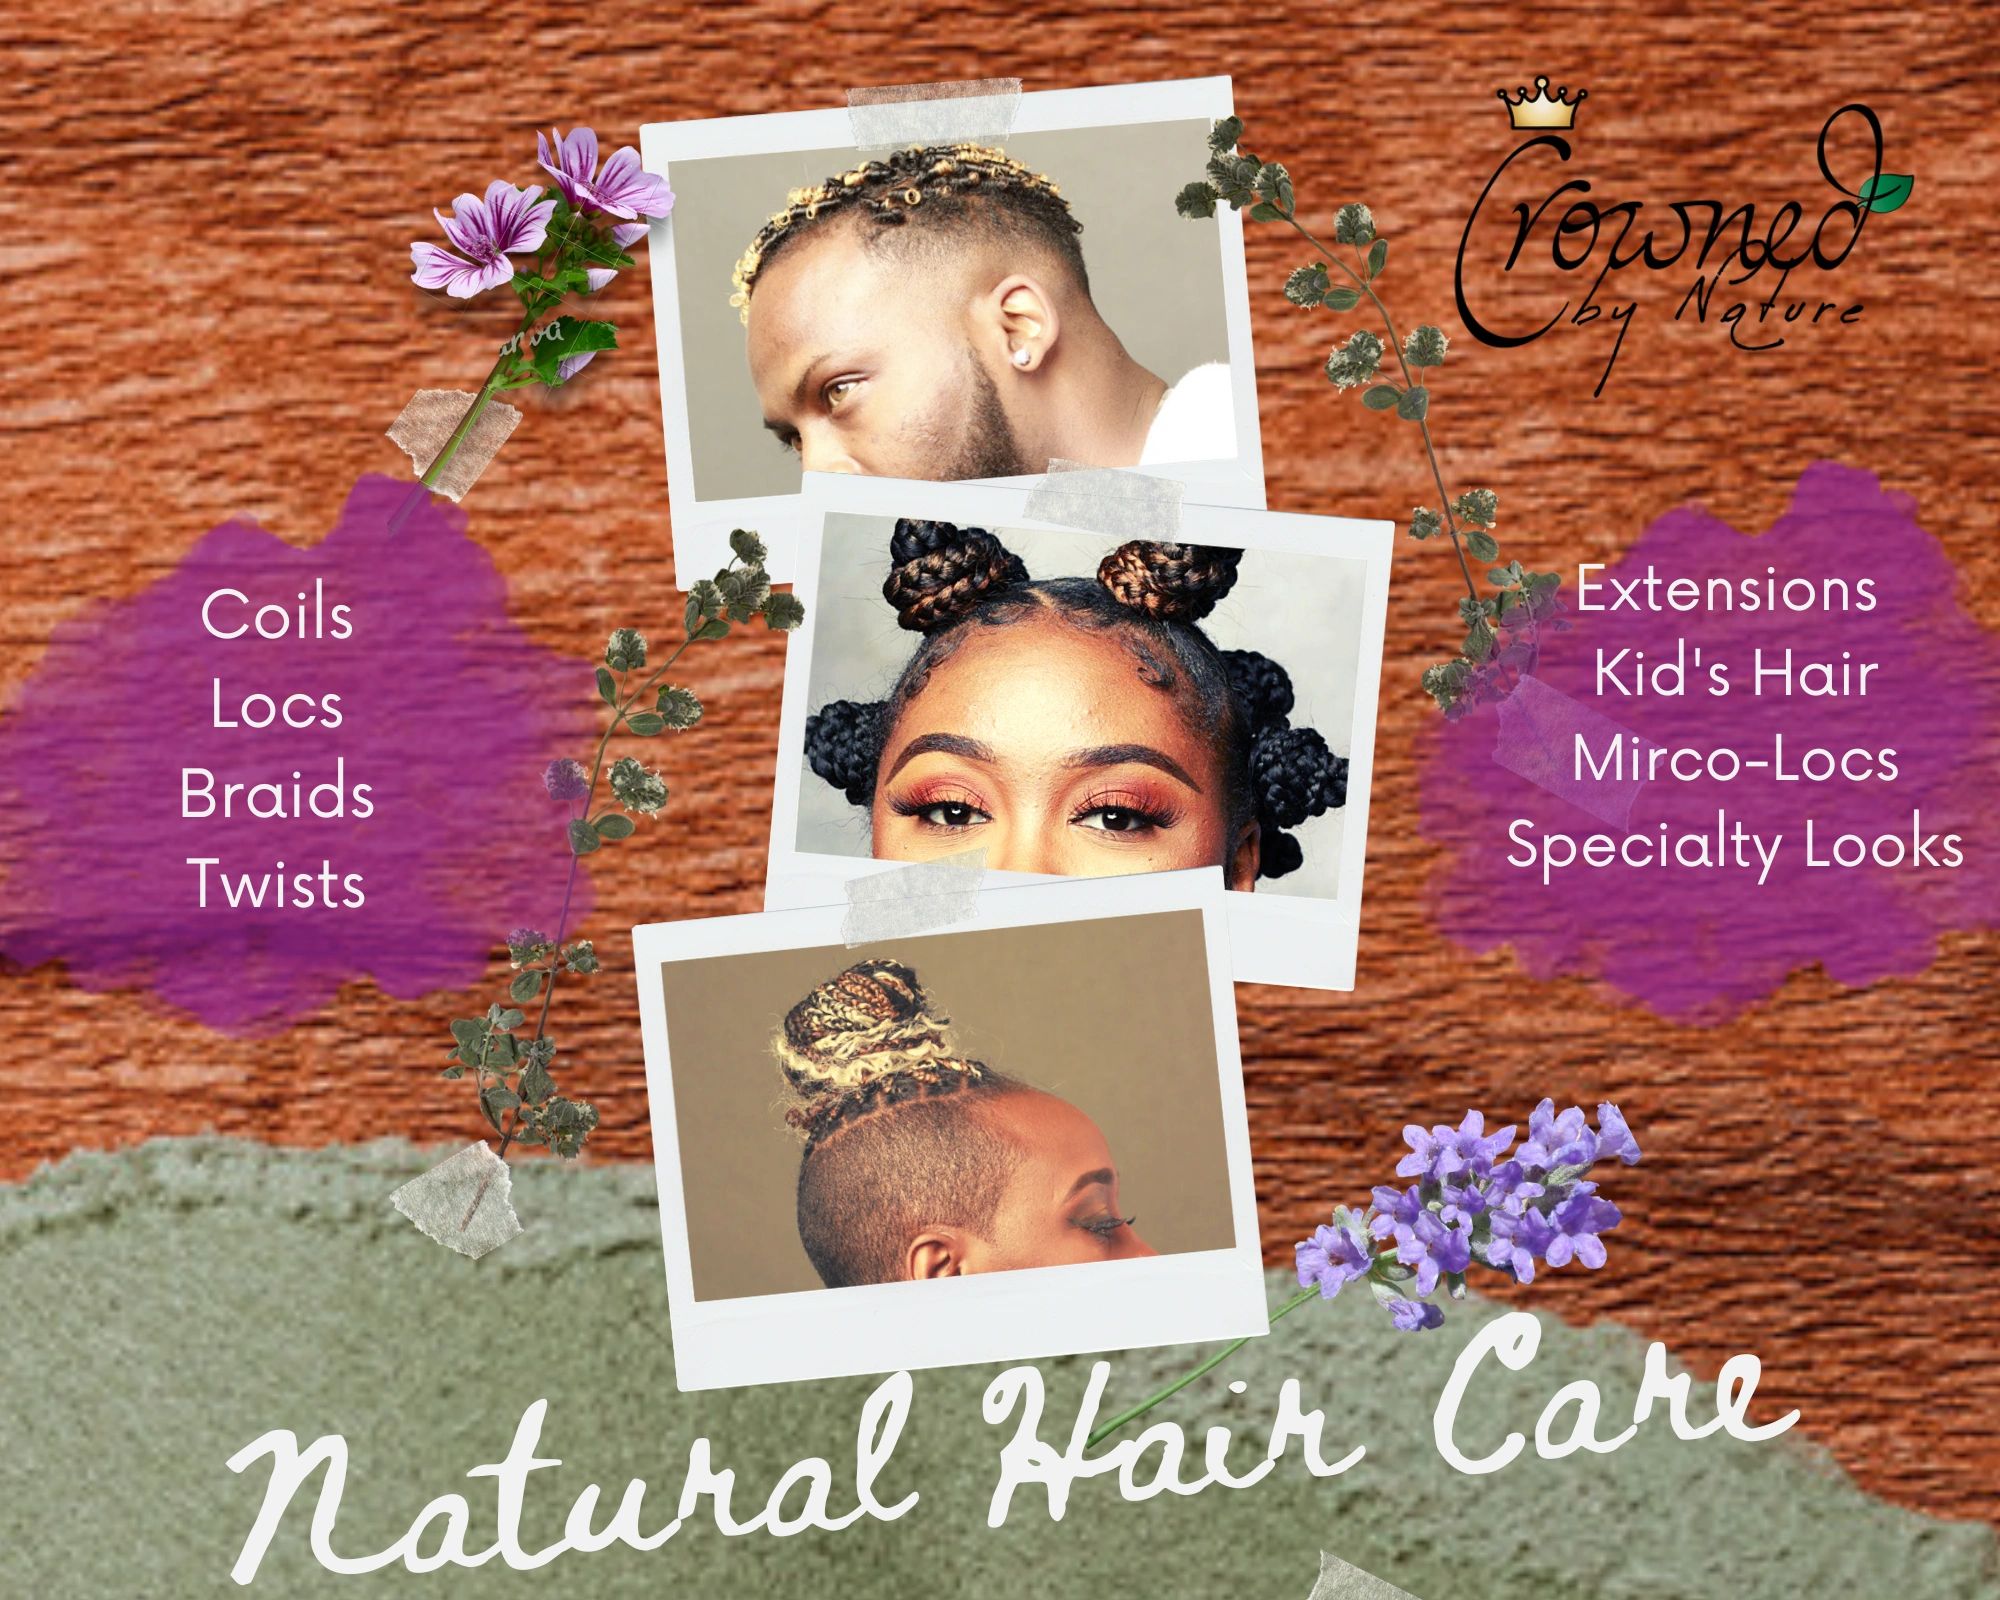 Crowned by Nature LLC 
Crowned by Nature beauty salon
natural hairstylist in austell